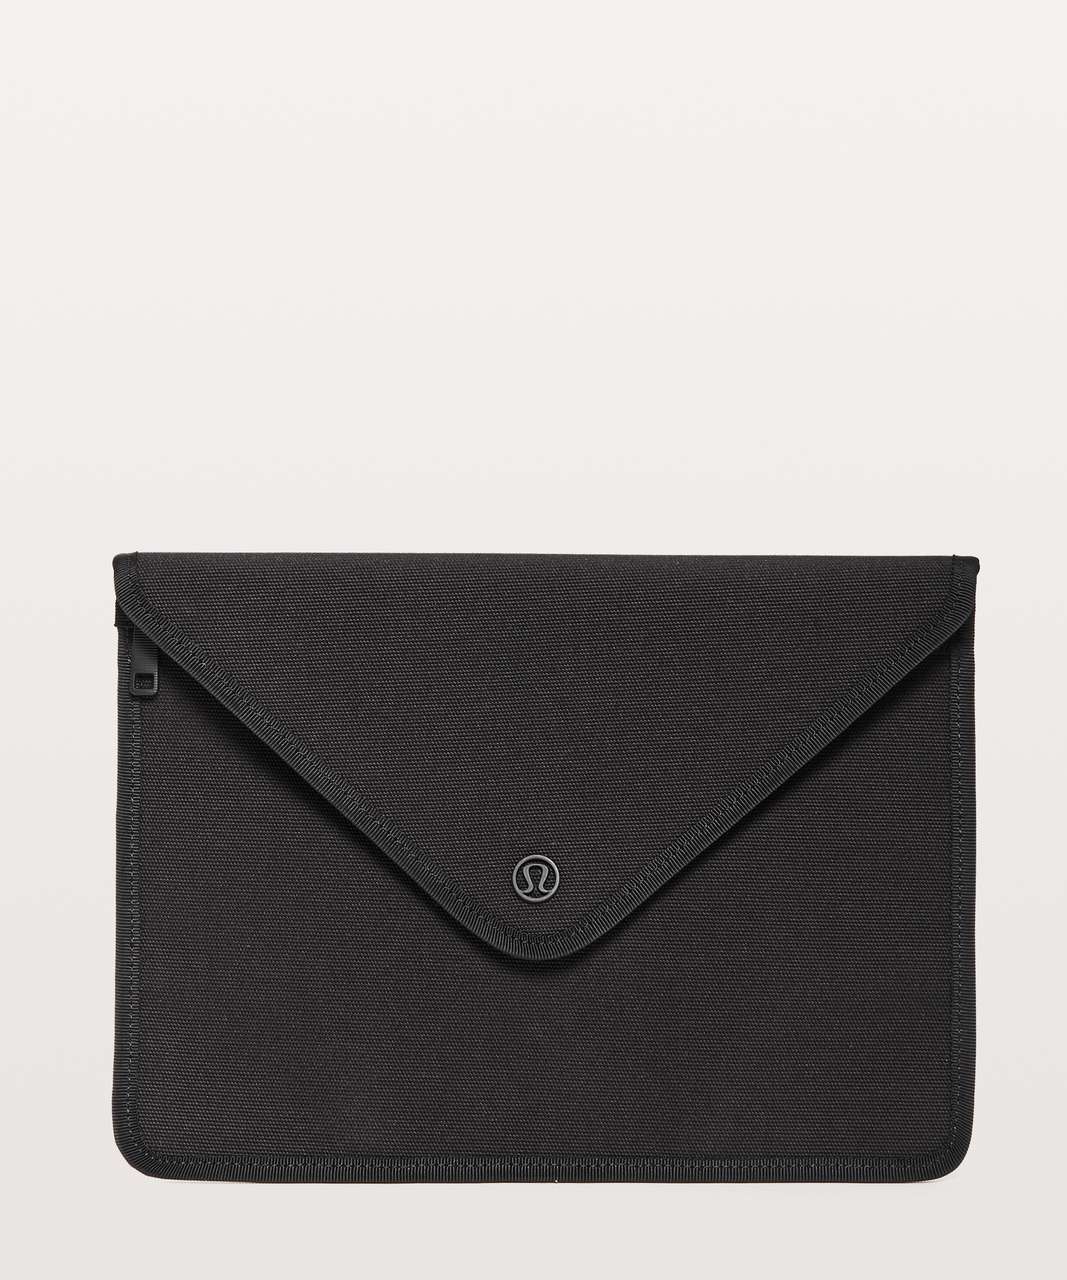 Lululemon Out On Top Envelope Pouch - Black